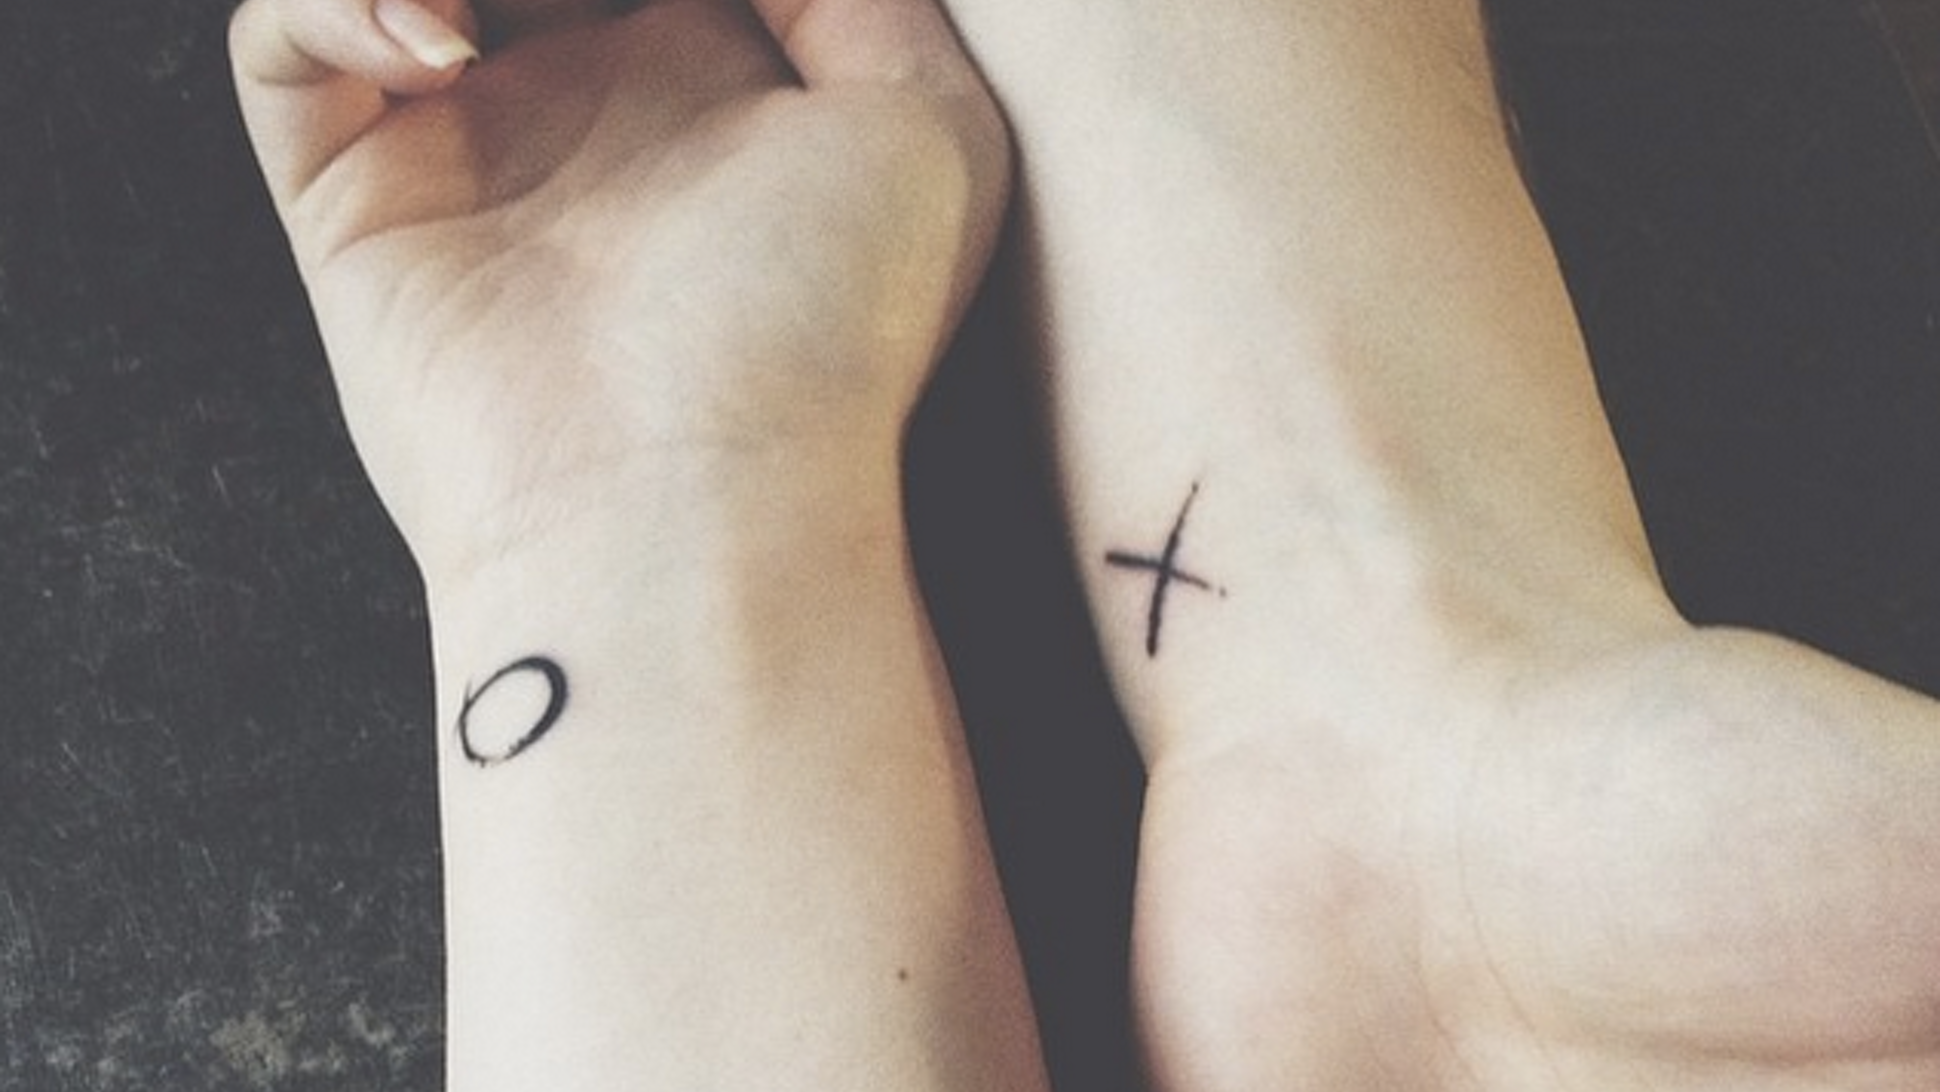 16 Beautiful Tattoos For Couples That Are Actually Awesome And Won't Make You Throw Up A Little In Your Mouth — PHOTOS - 16 Beautiful Tattoos For Couples That Are Actually Awesome And Won't Make You Throw Up A Little In Your Mouth — PHOTOS -   10 fitness Couples tattoos ideas